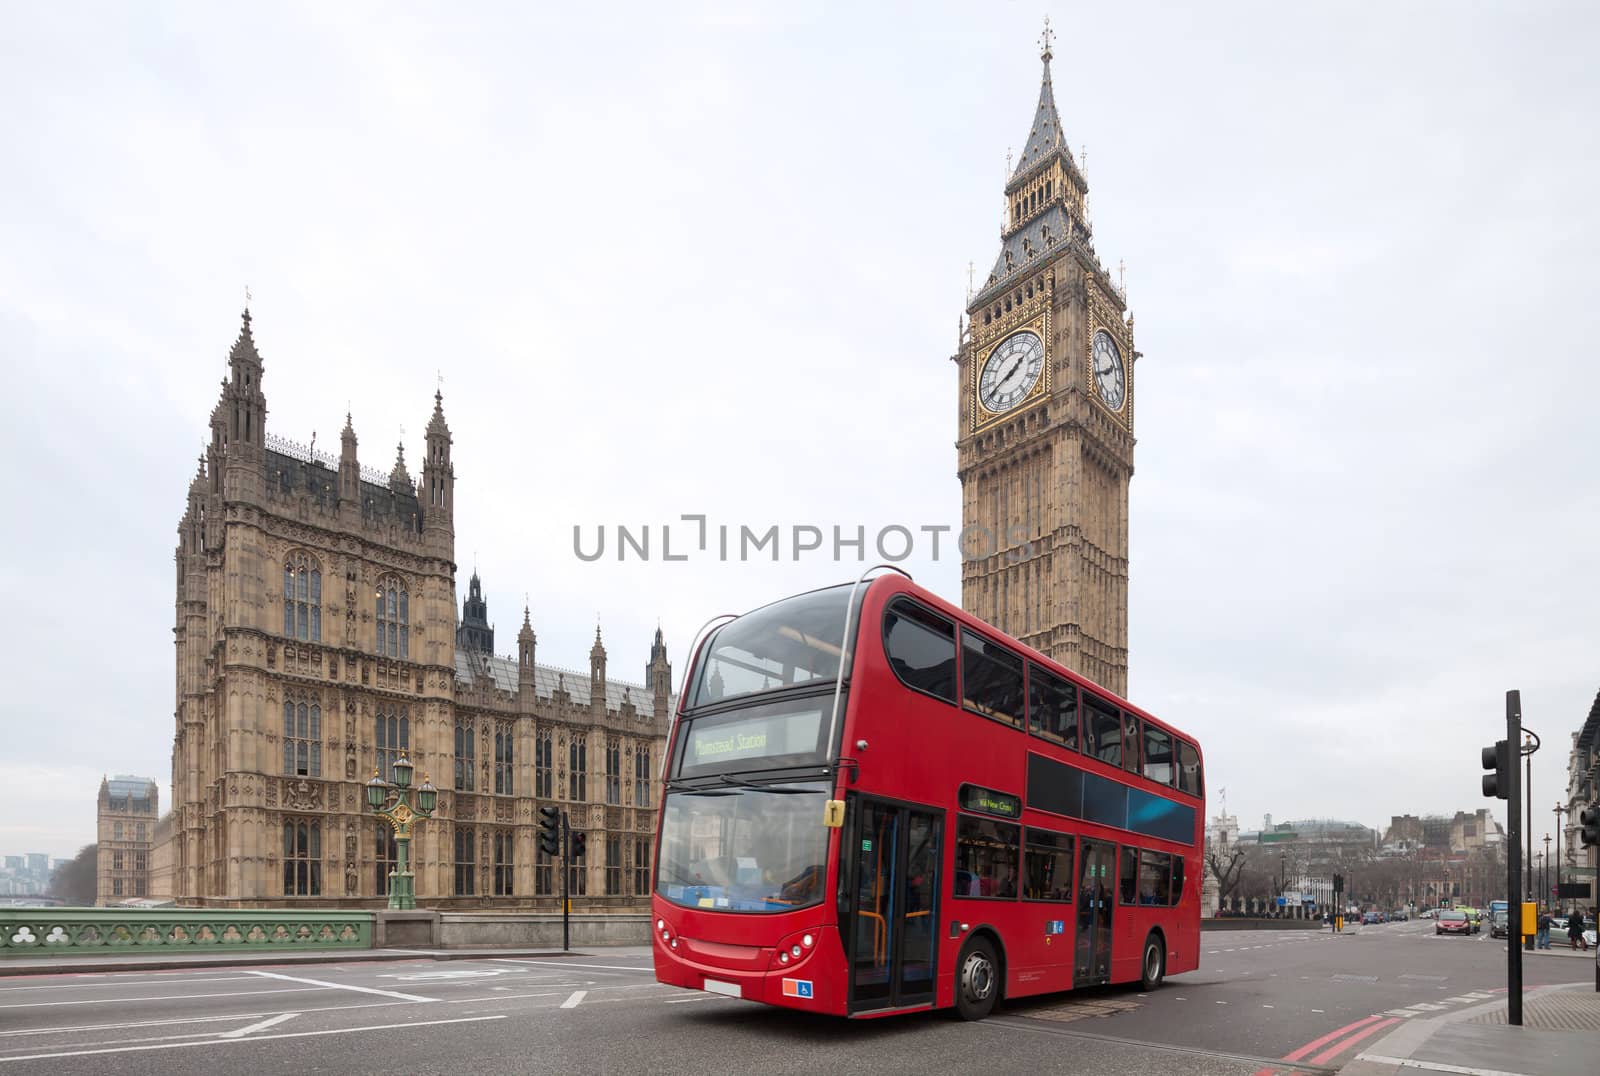 Big Ben with red double-decker in London, UK by Antartis